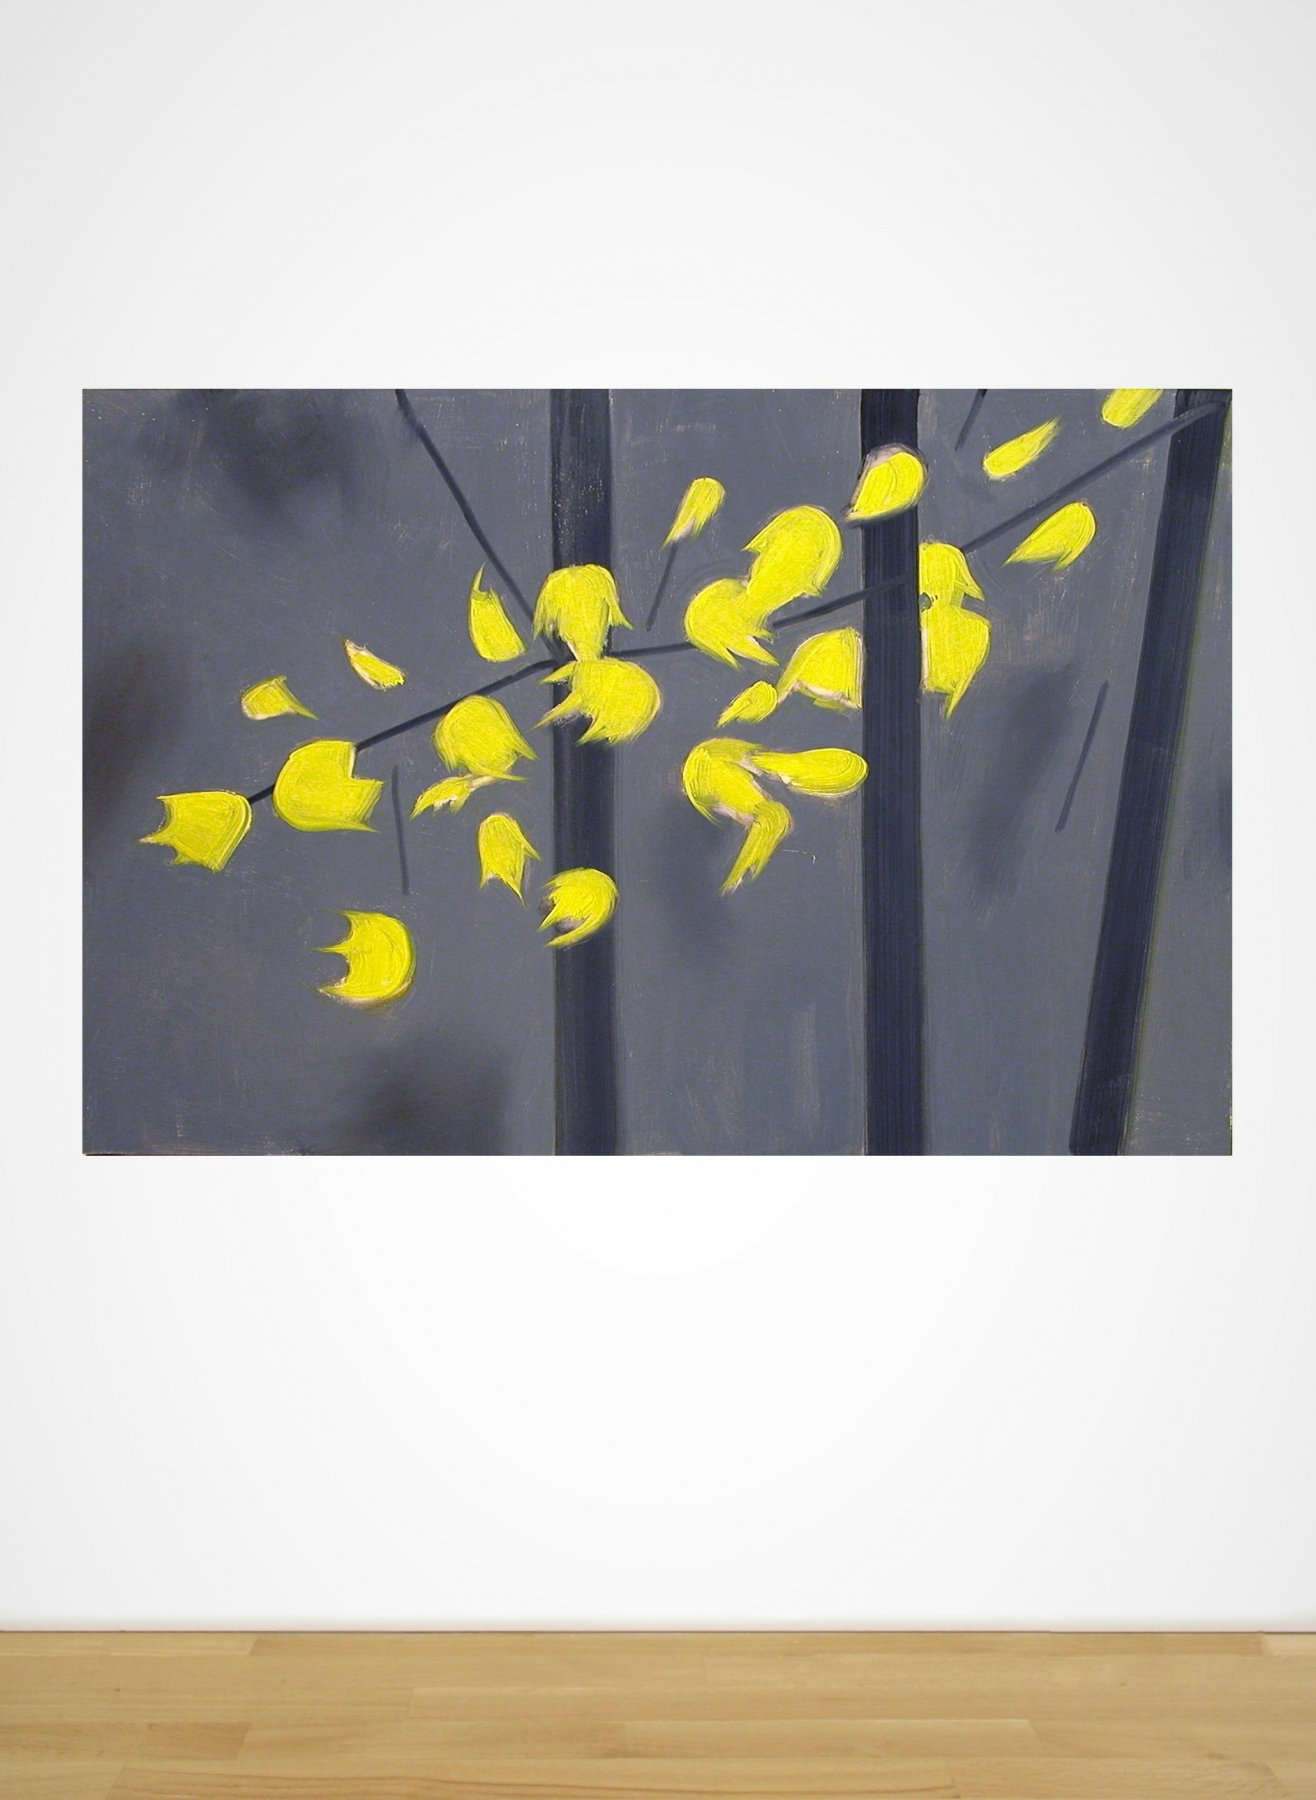 Installation view&amp;nbsp;of&amp;nbsp;Yellow Leaves 2, 2006, oil on linen, 48 1/4 x 71 3/4 inches (122.6 x 182.3 cm)